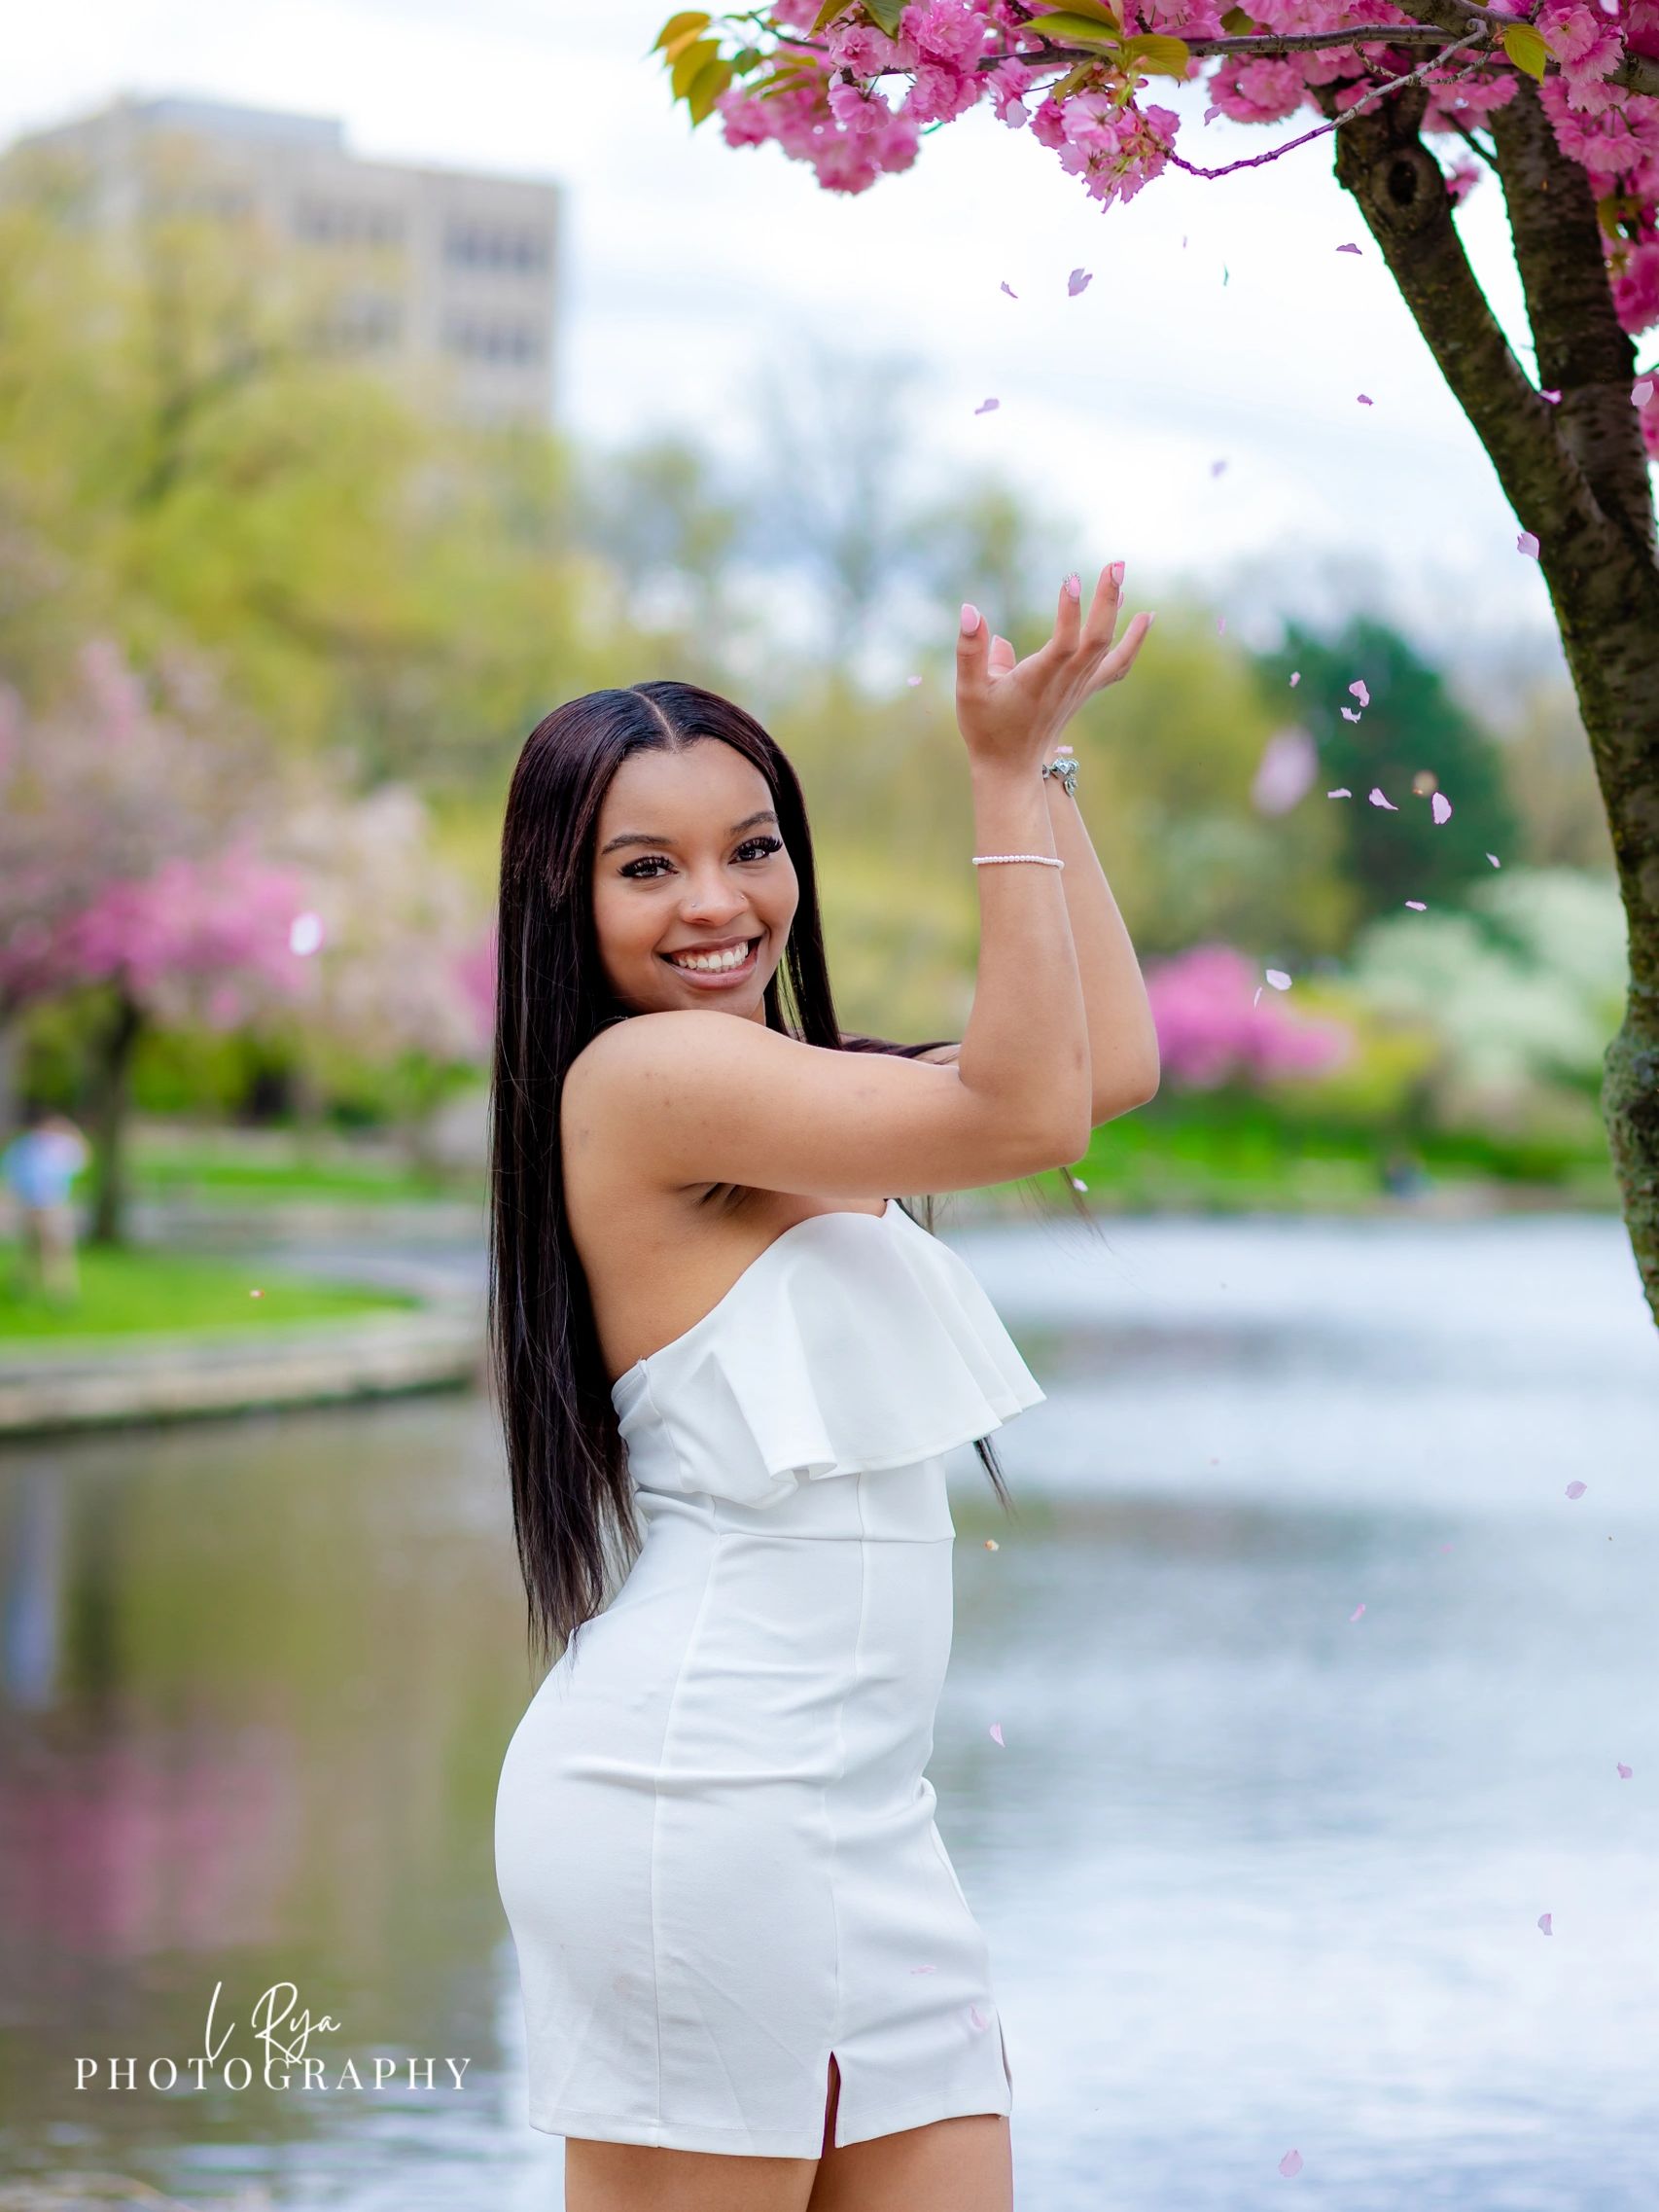 High school senior girl in white dress smiling while catching cherry blossom petal falling off a tre